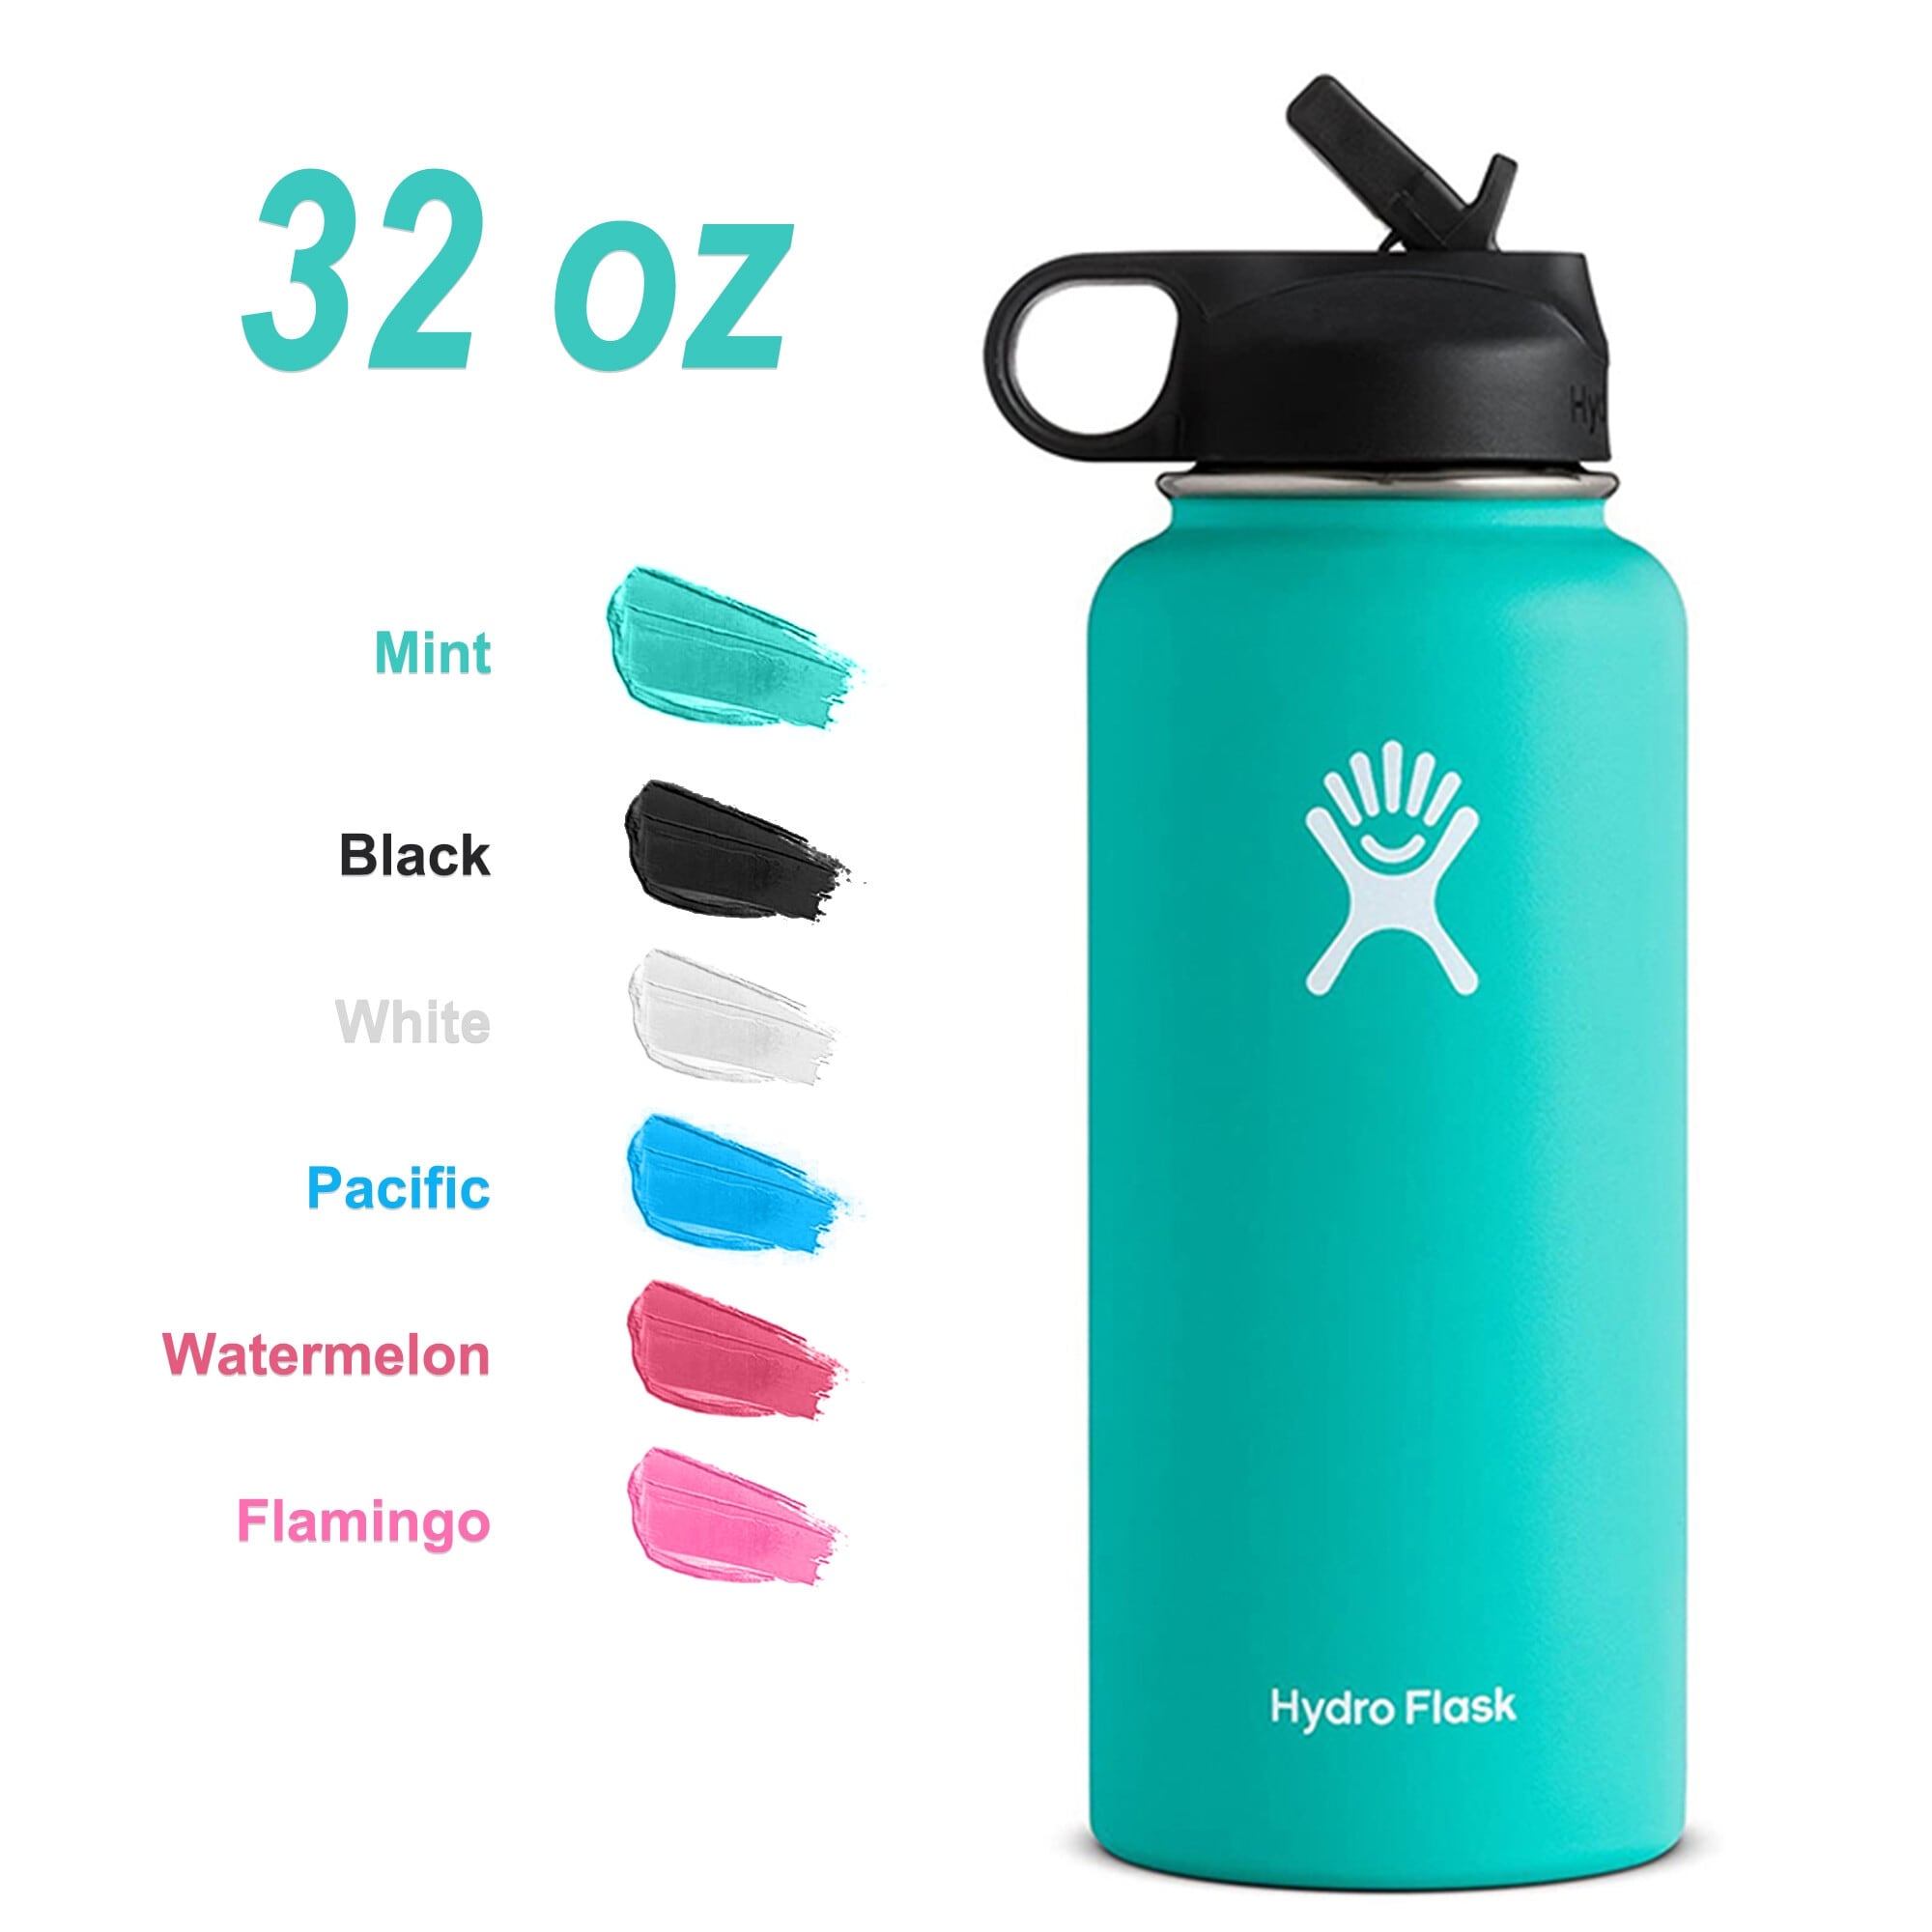 https://ak1.ostkcdn.com/images/products/is/images/direct/357181555edc3d2544fc5f3e821cf8907b253bf0/Hydro-Flask-32oz-Vacuum-Insulated-Stainless-Steel-Water-Bottle-Wide-Mouth-with-Straw-Lid.jpg